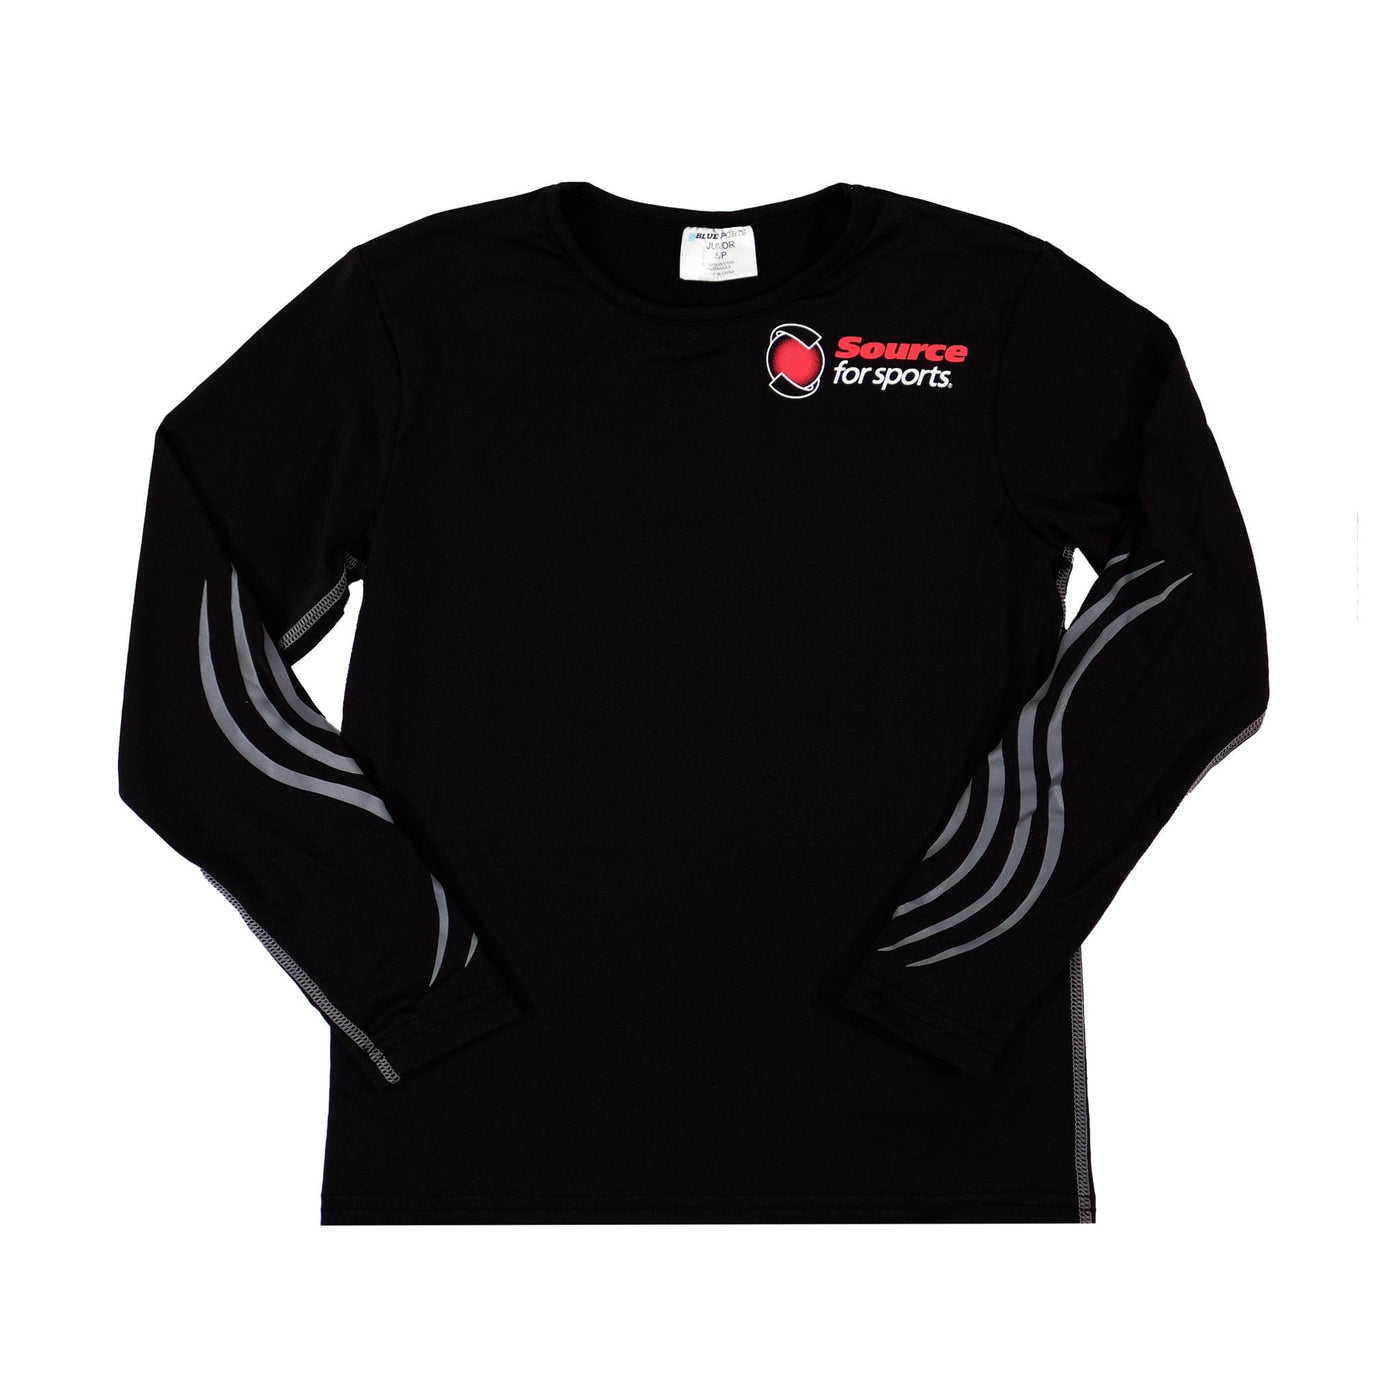 Blue Sports Compression Long Sleeve Senior Shirt - The Hockey Shop Source For Sports